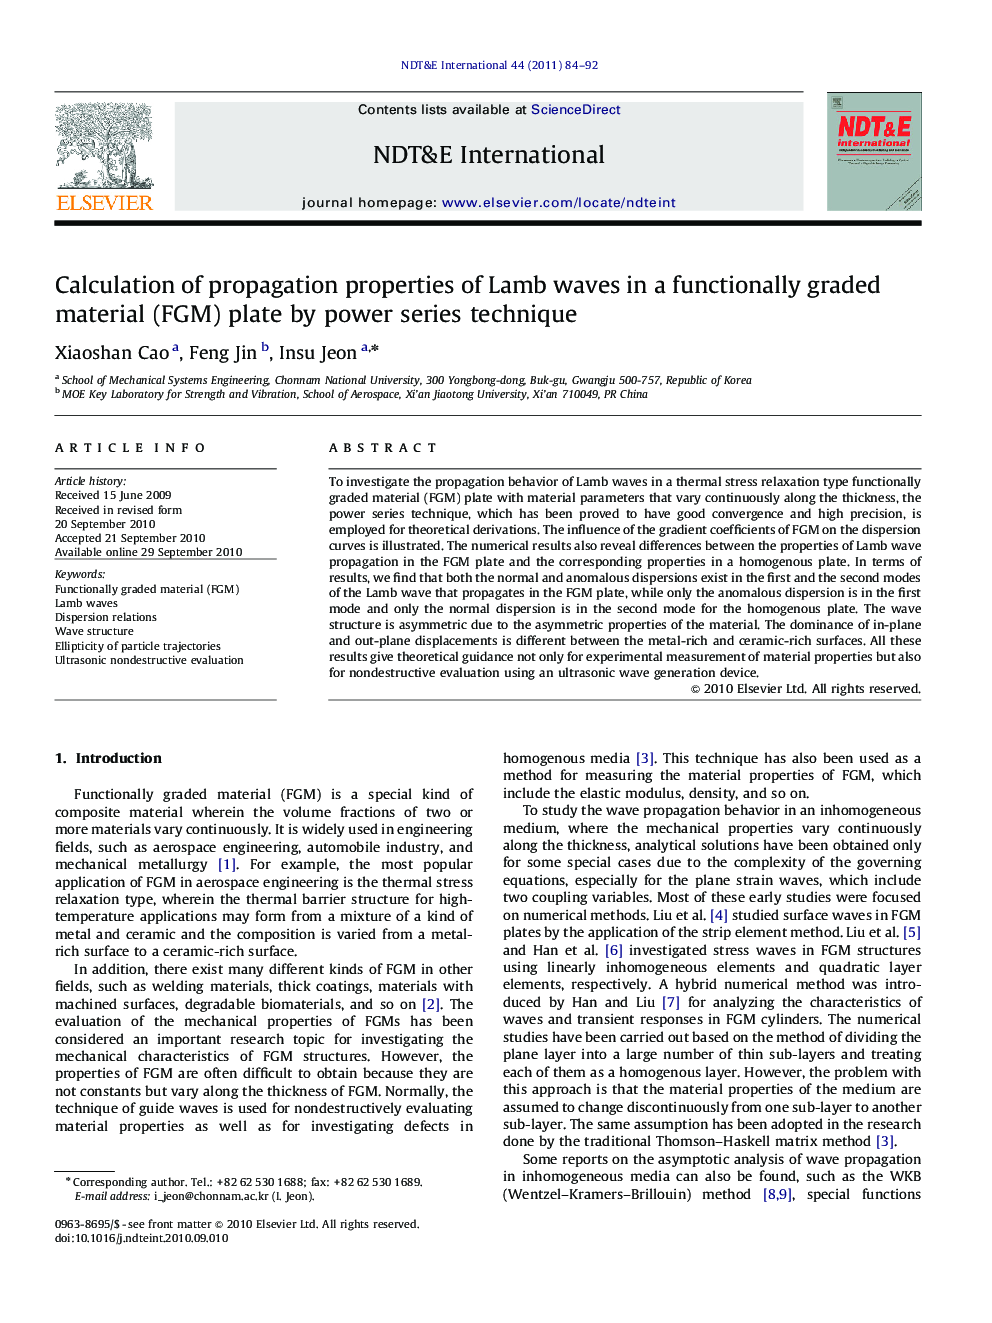 Calculation of propagation properties of Lamb waves in a functionally graded material (FGM) plate by power series technique